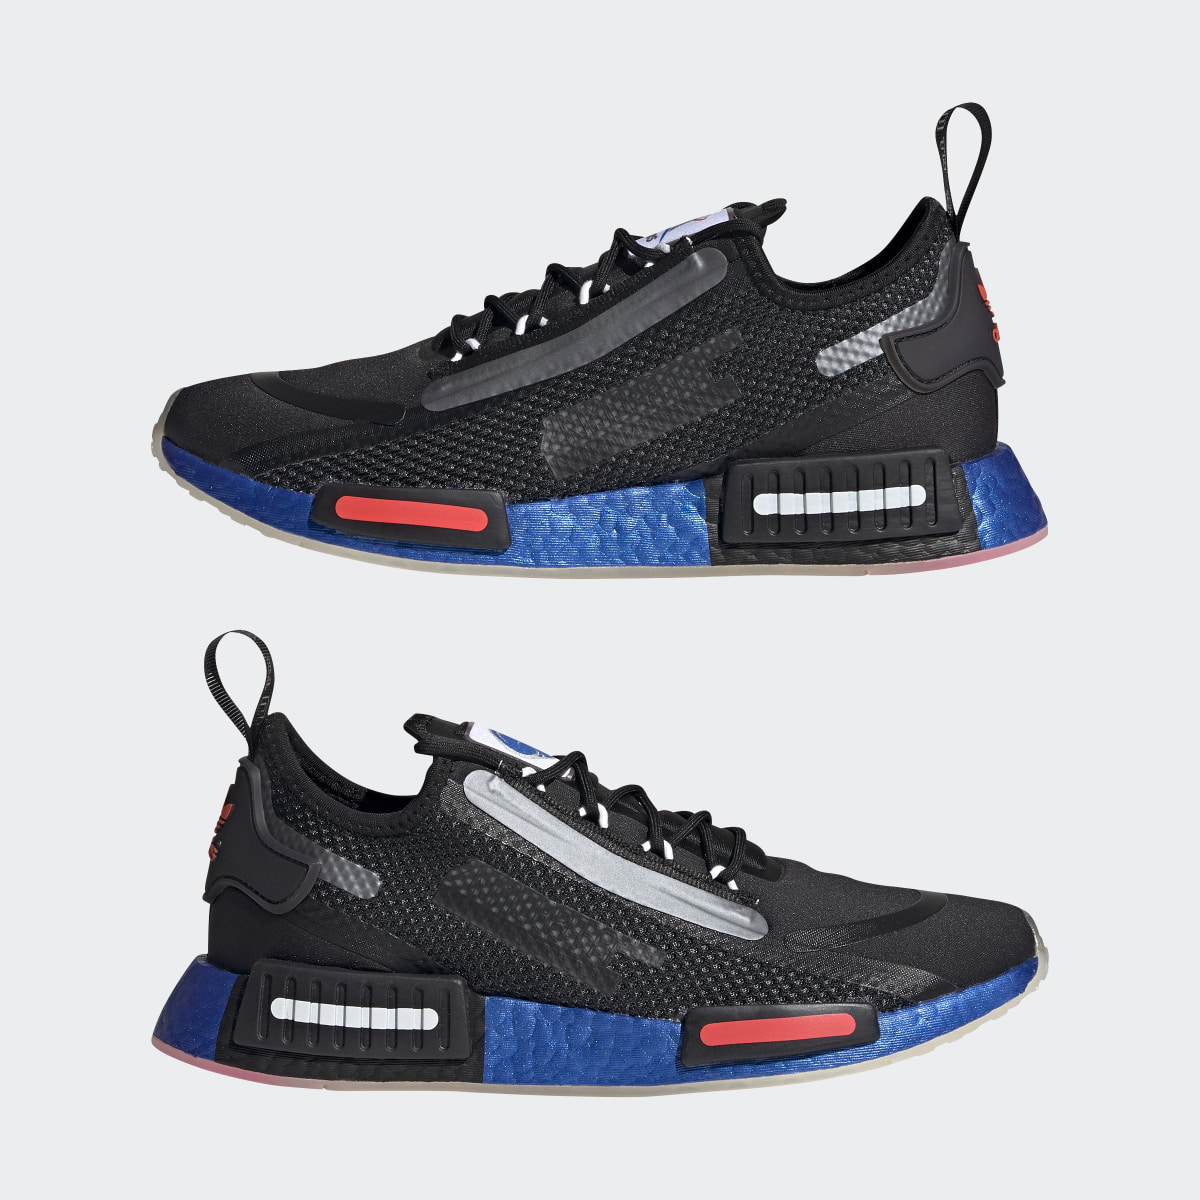 Adidas NMD_R1 SPECTOO SHOES. 8